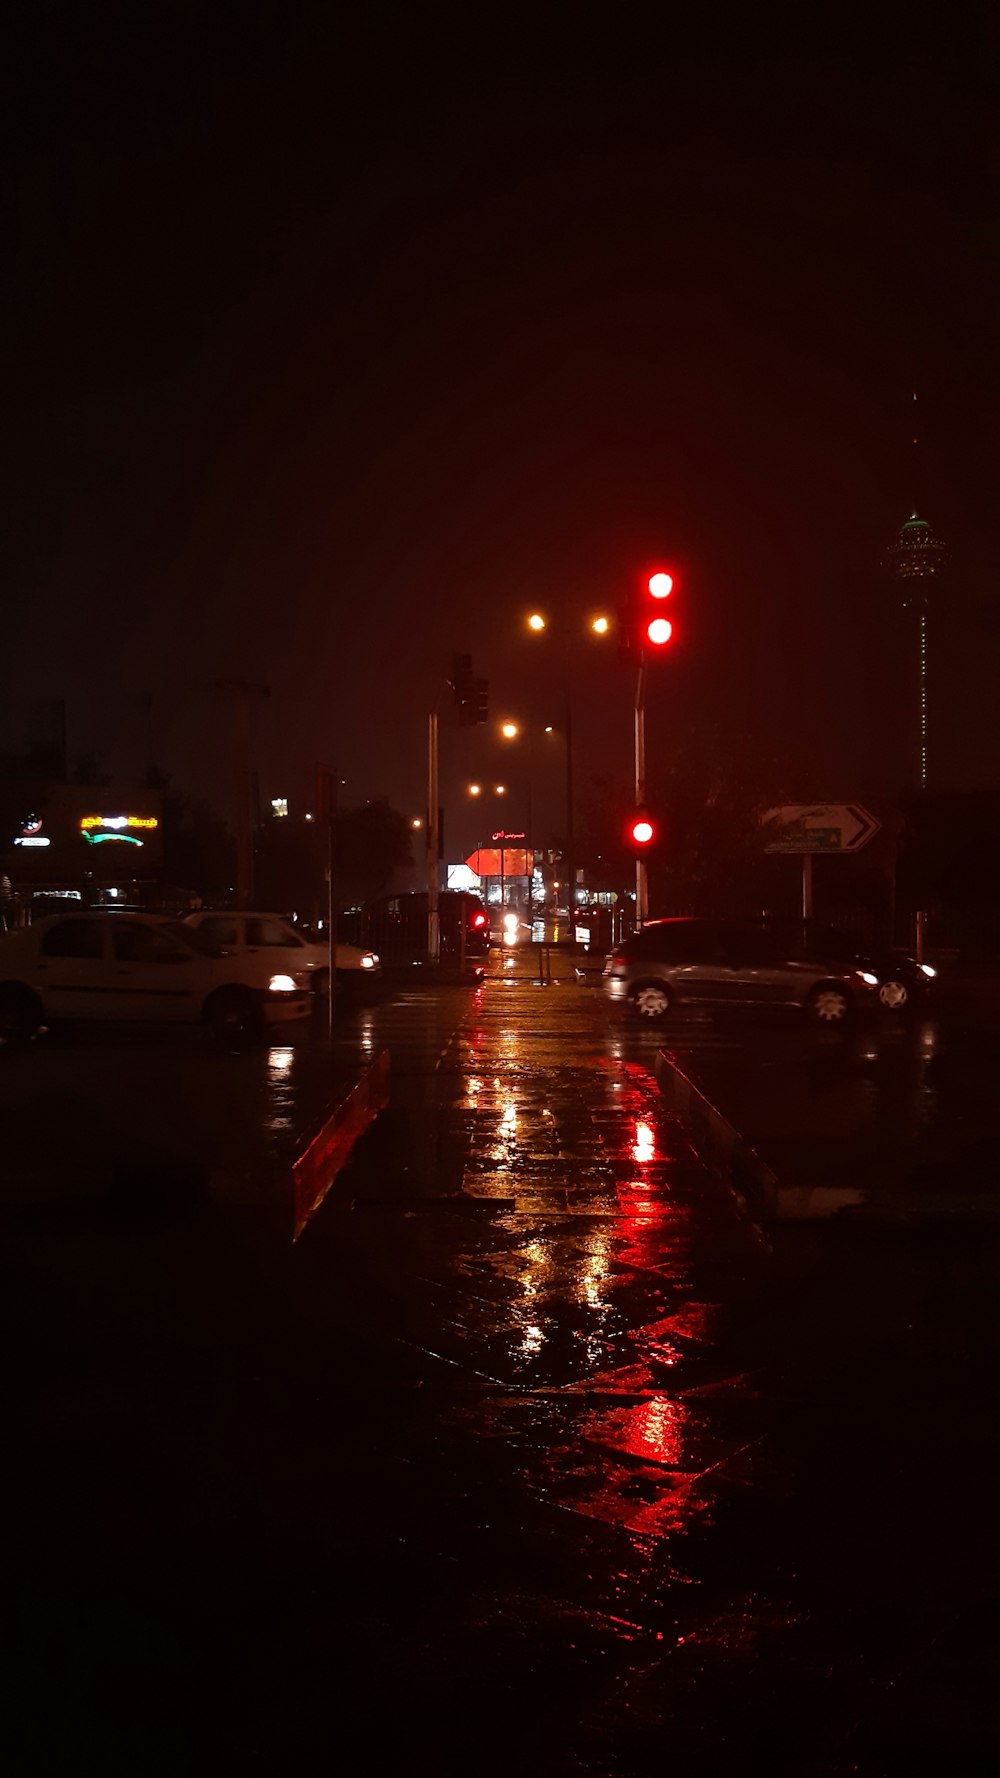 traffic light with red lights during nighttime